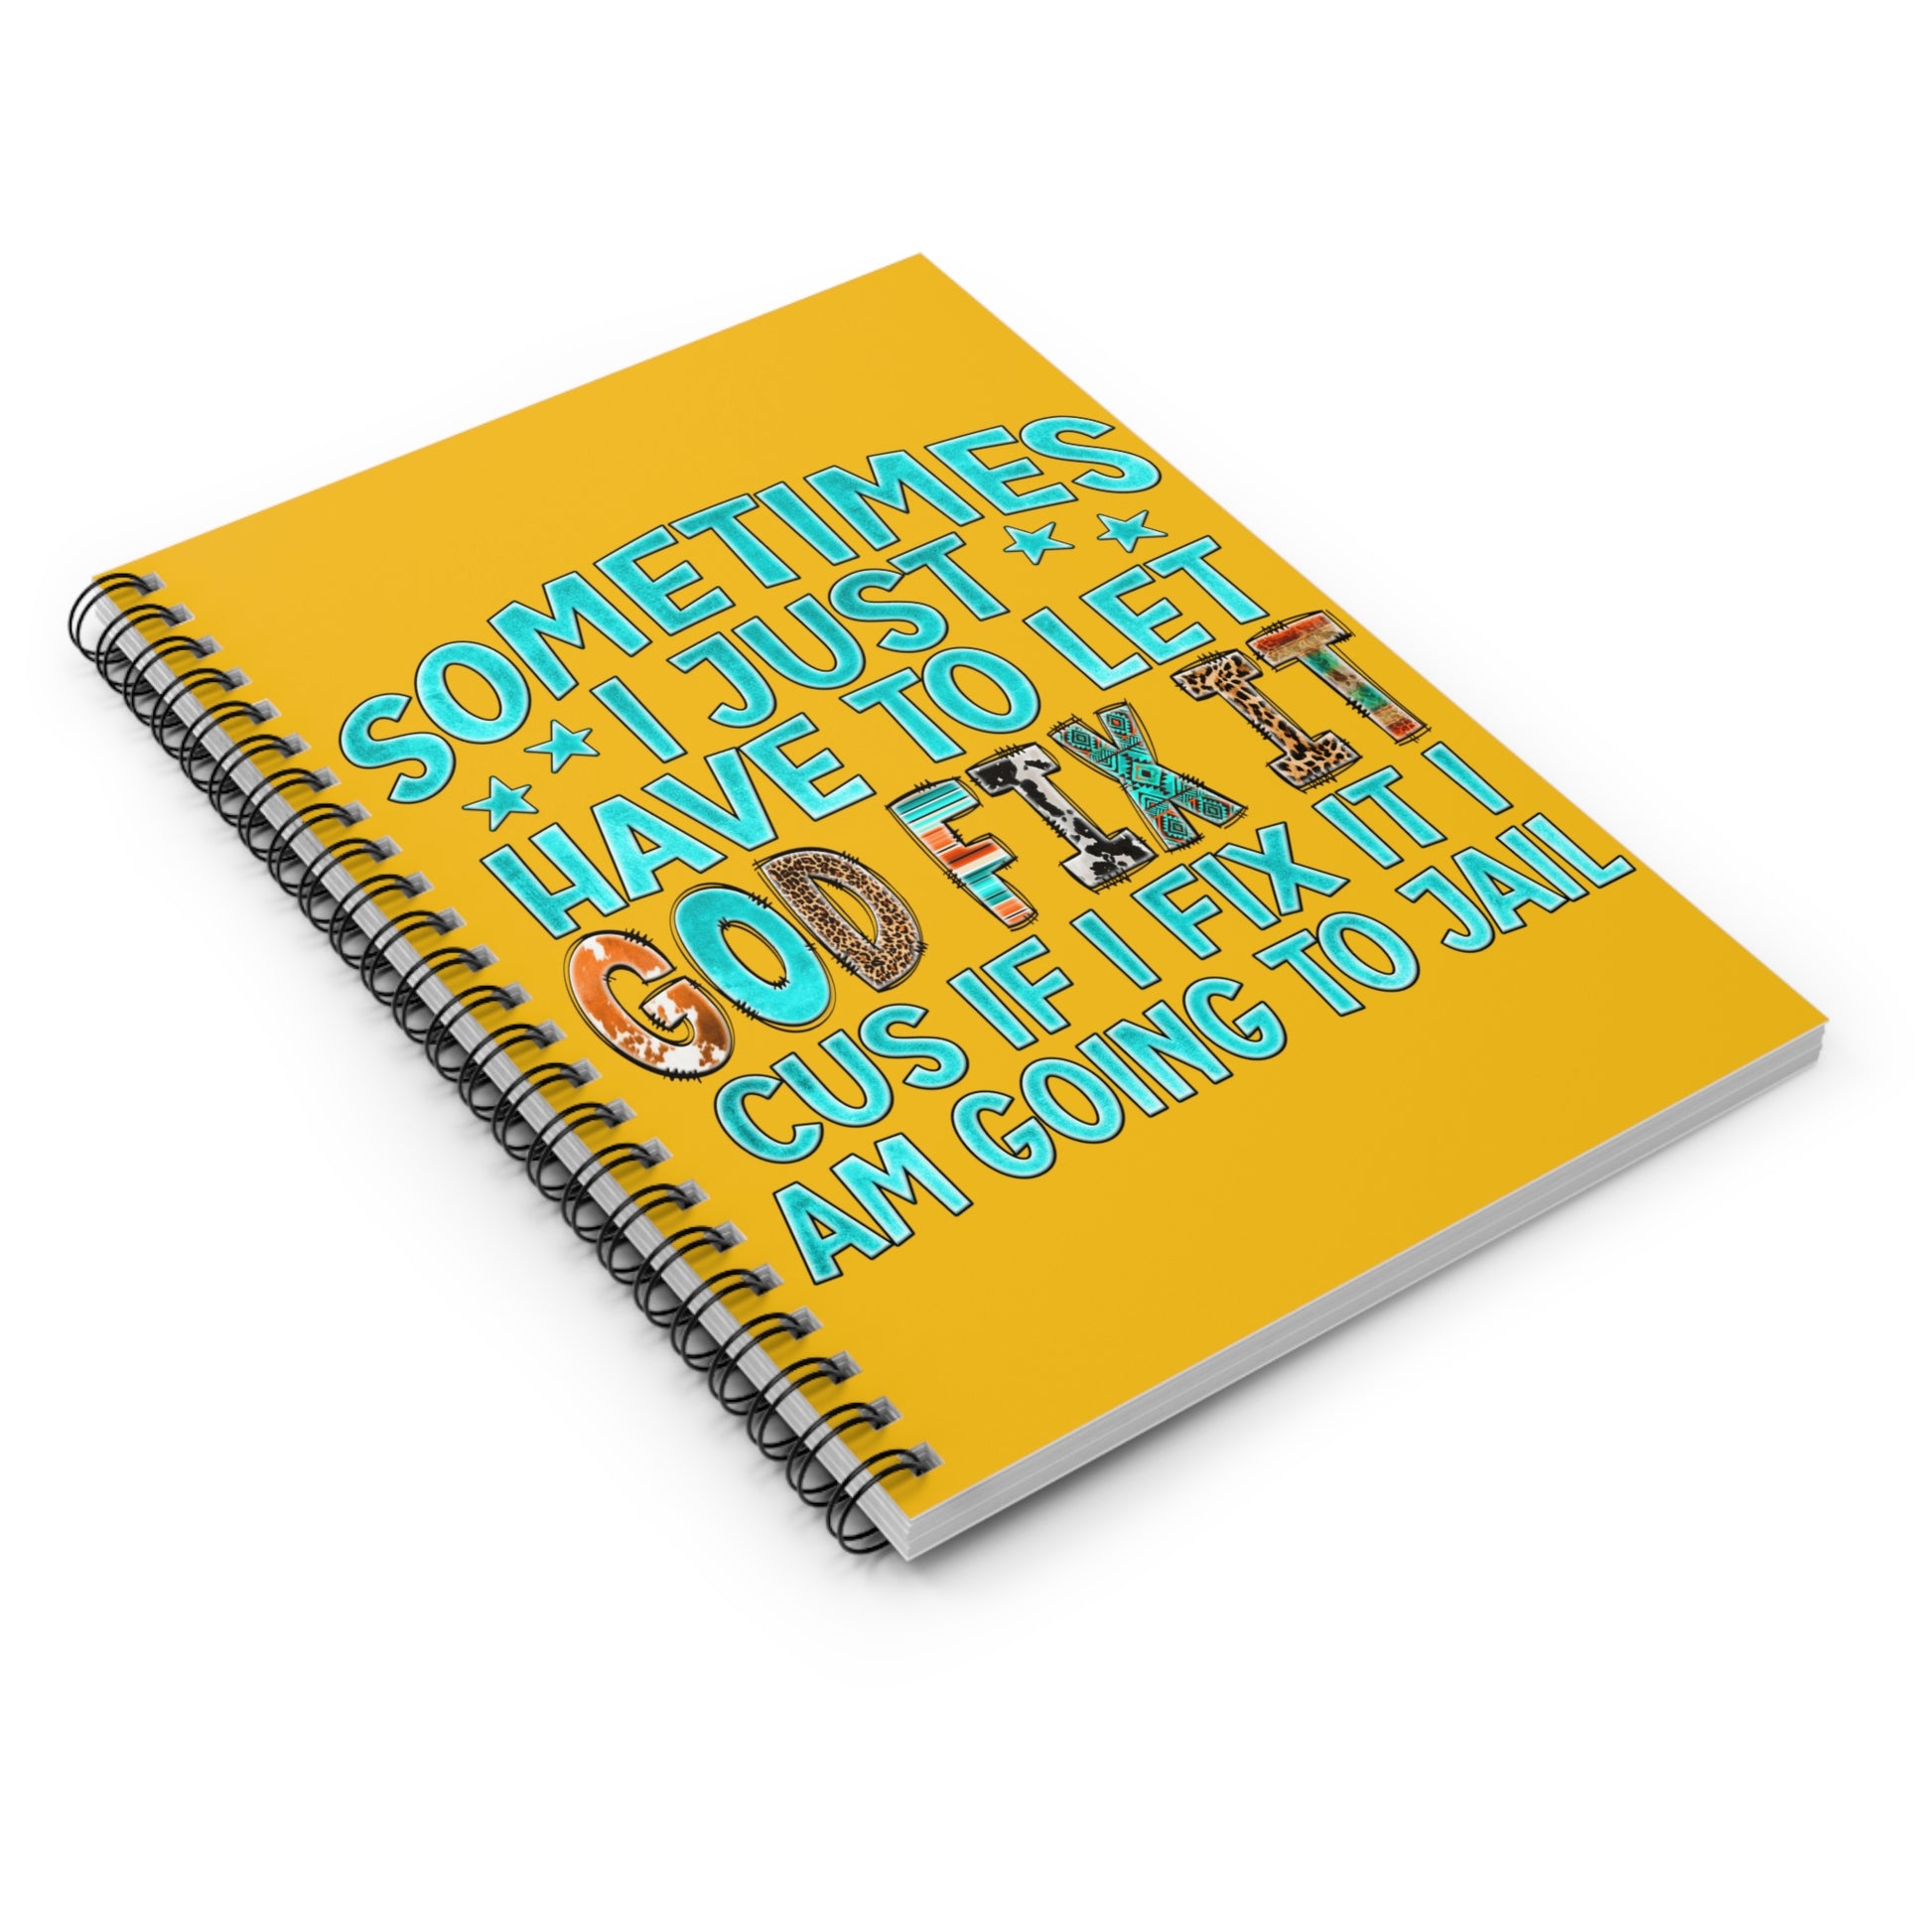 To Do List: Spiral Notebook - Log Books - Journals - Diaries - and More Custom Printed by TheGlassyLass